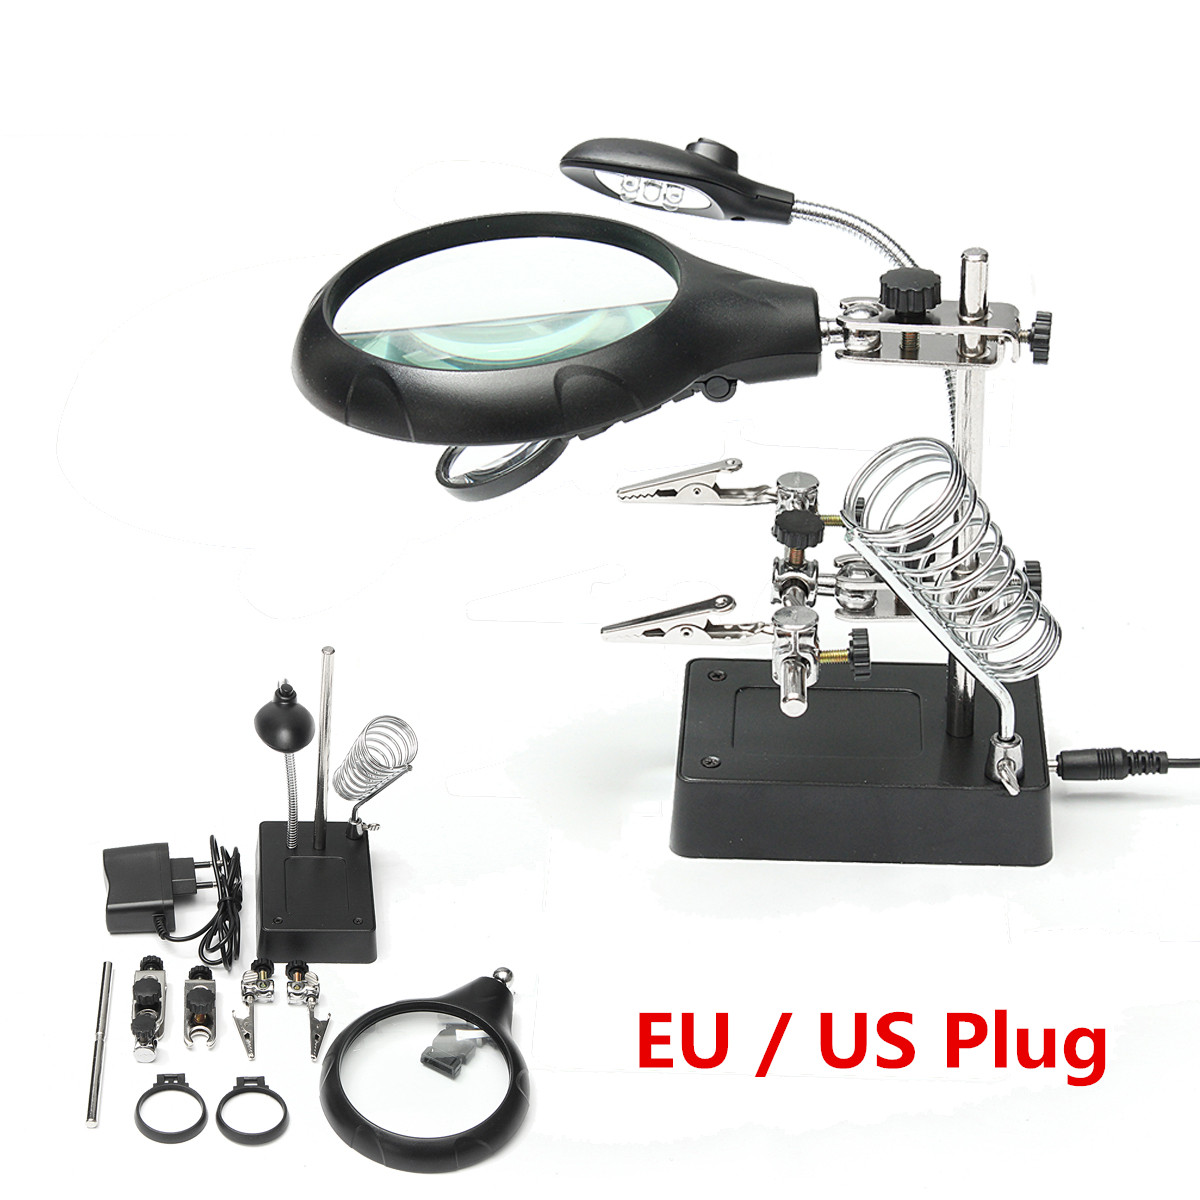 5-LED-Light-Magnifier-Magnifying-Glass-Helping-Hand-Soldering-Stand-with-3-Lens-1121941-9